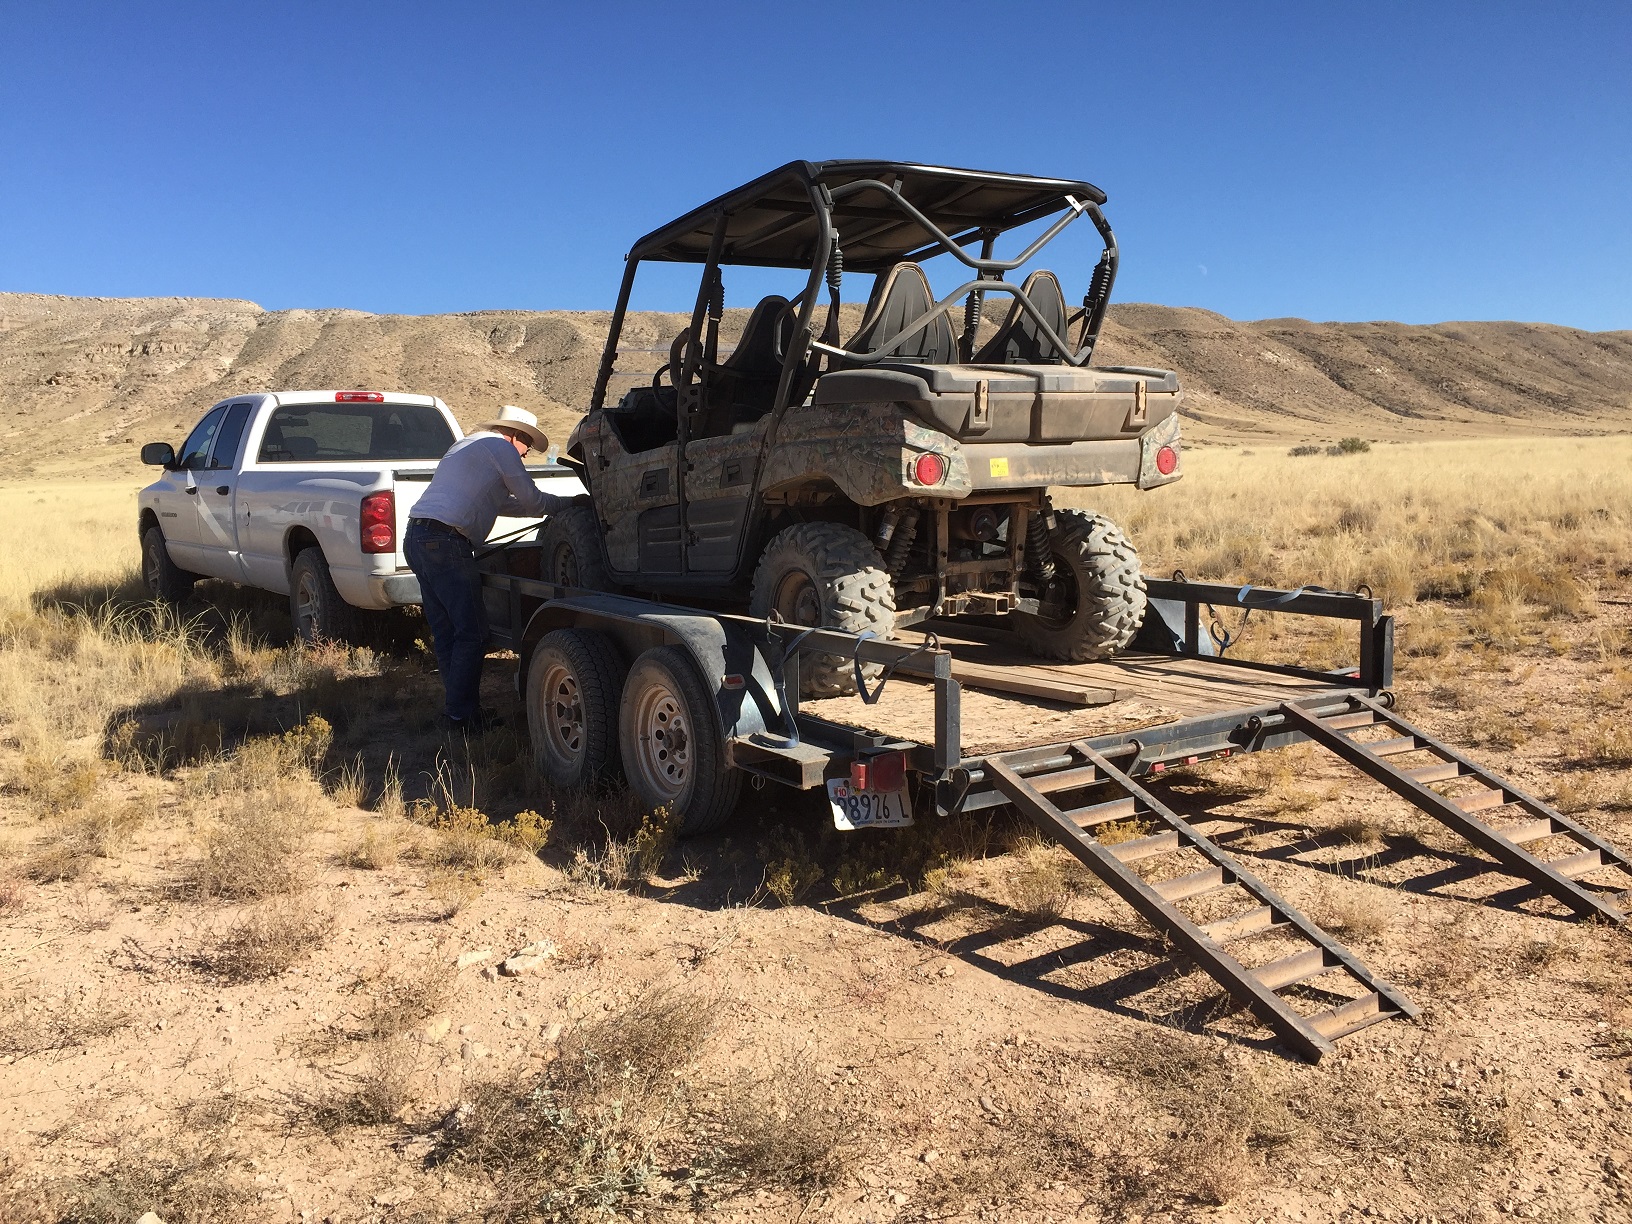 Thad Stewart finishing loading his ATV onto a trailer at the Temple & Navajo Trails